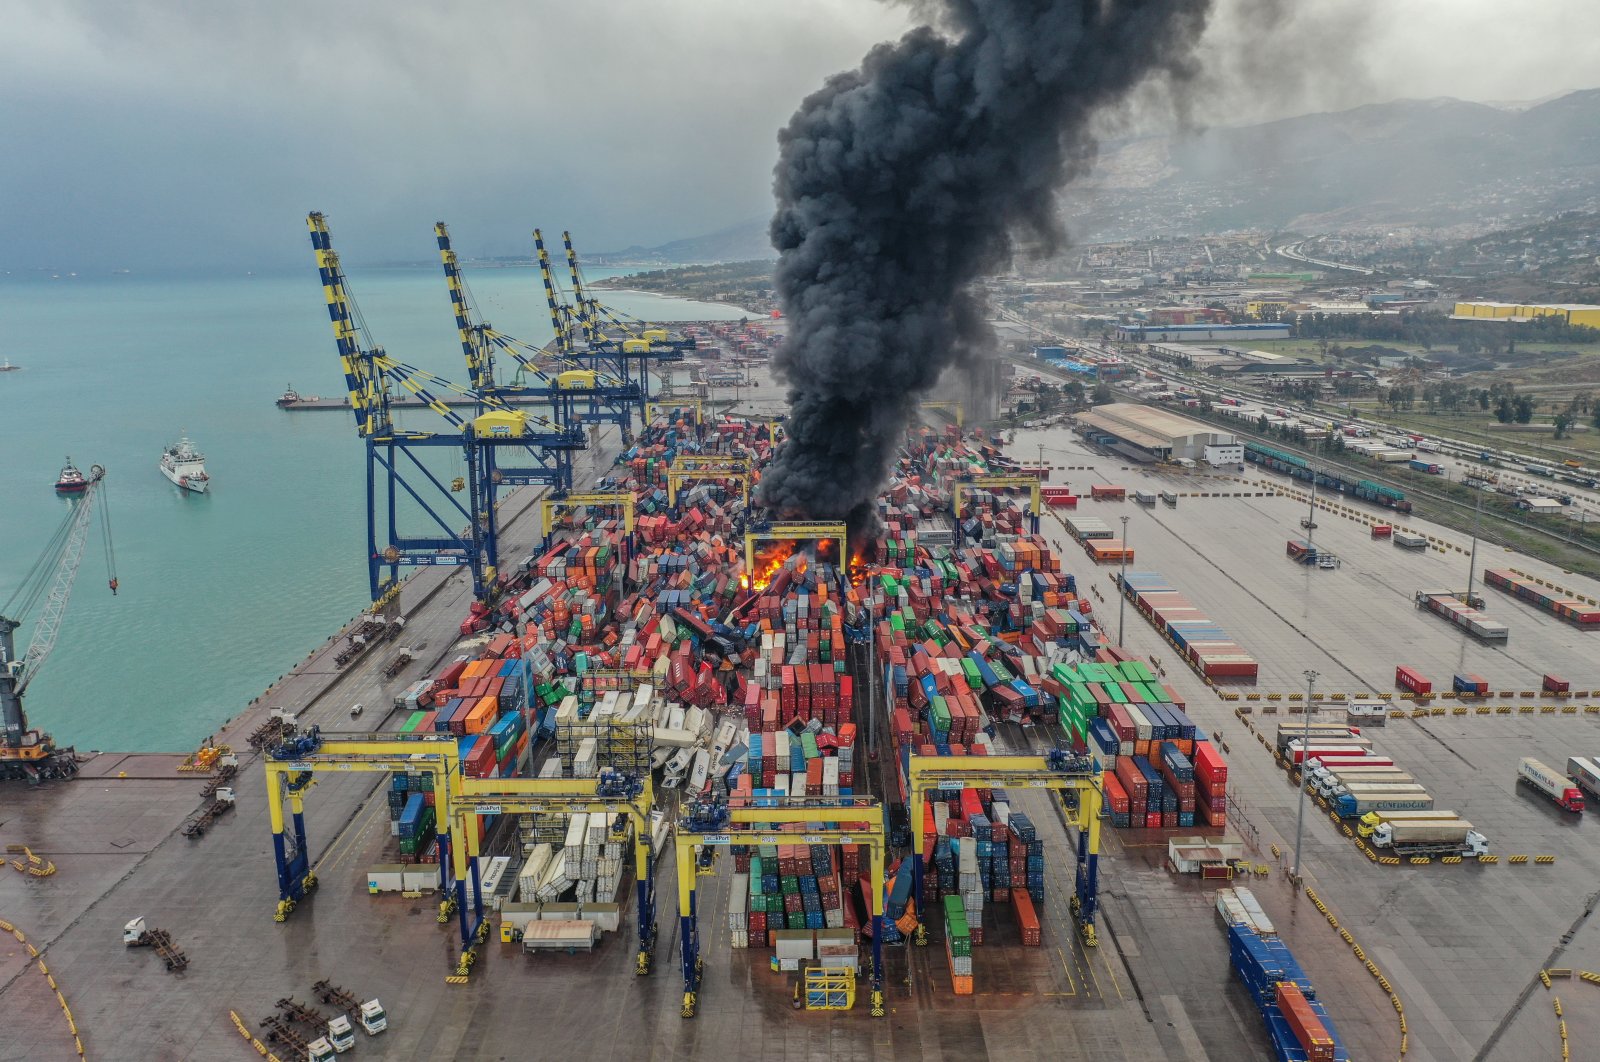 Dark smoke rises after a fire broke out among containers toppled at a major port in the Mediterranean coastal city of Iskenderun following an earthquake, southern Türkiye, Jan. 6, 2023. (AA Photo)